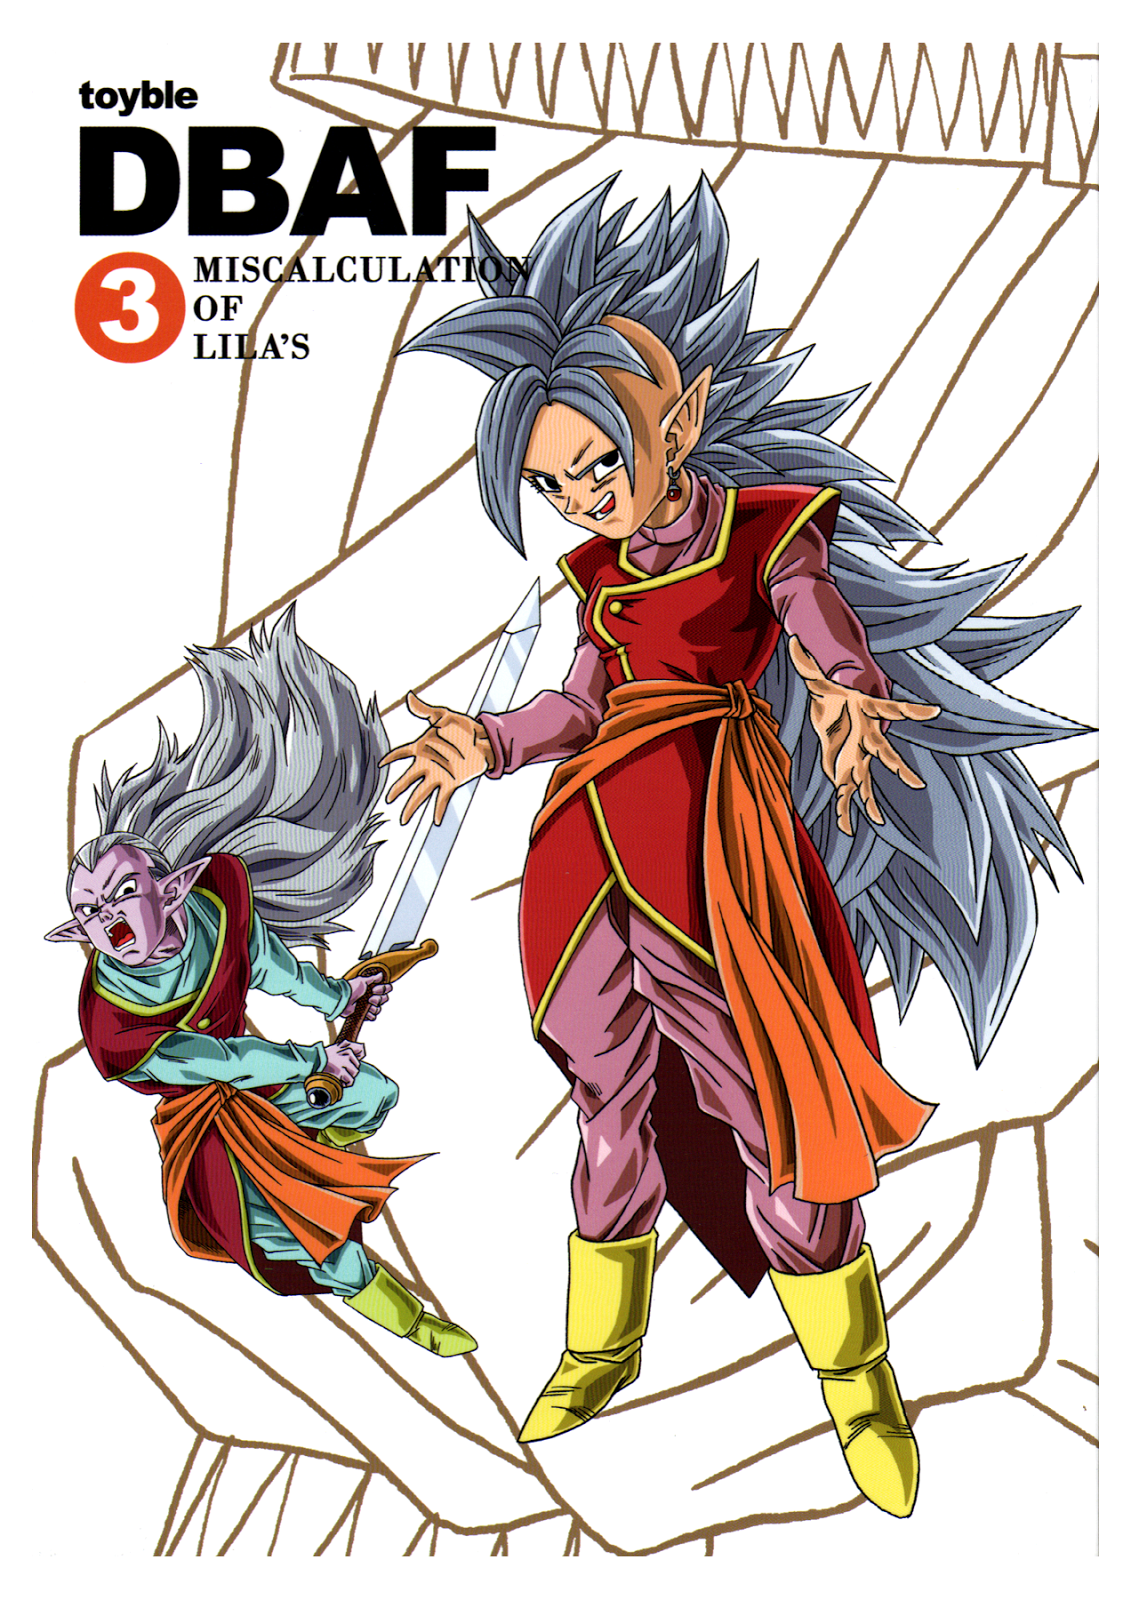 Dragon Ball AF - After The Future: May 2012